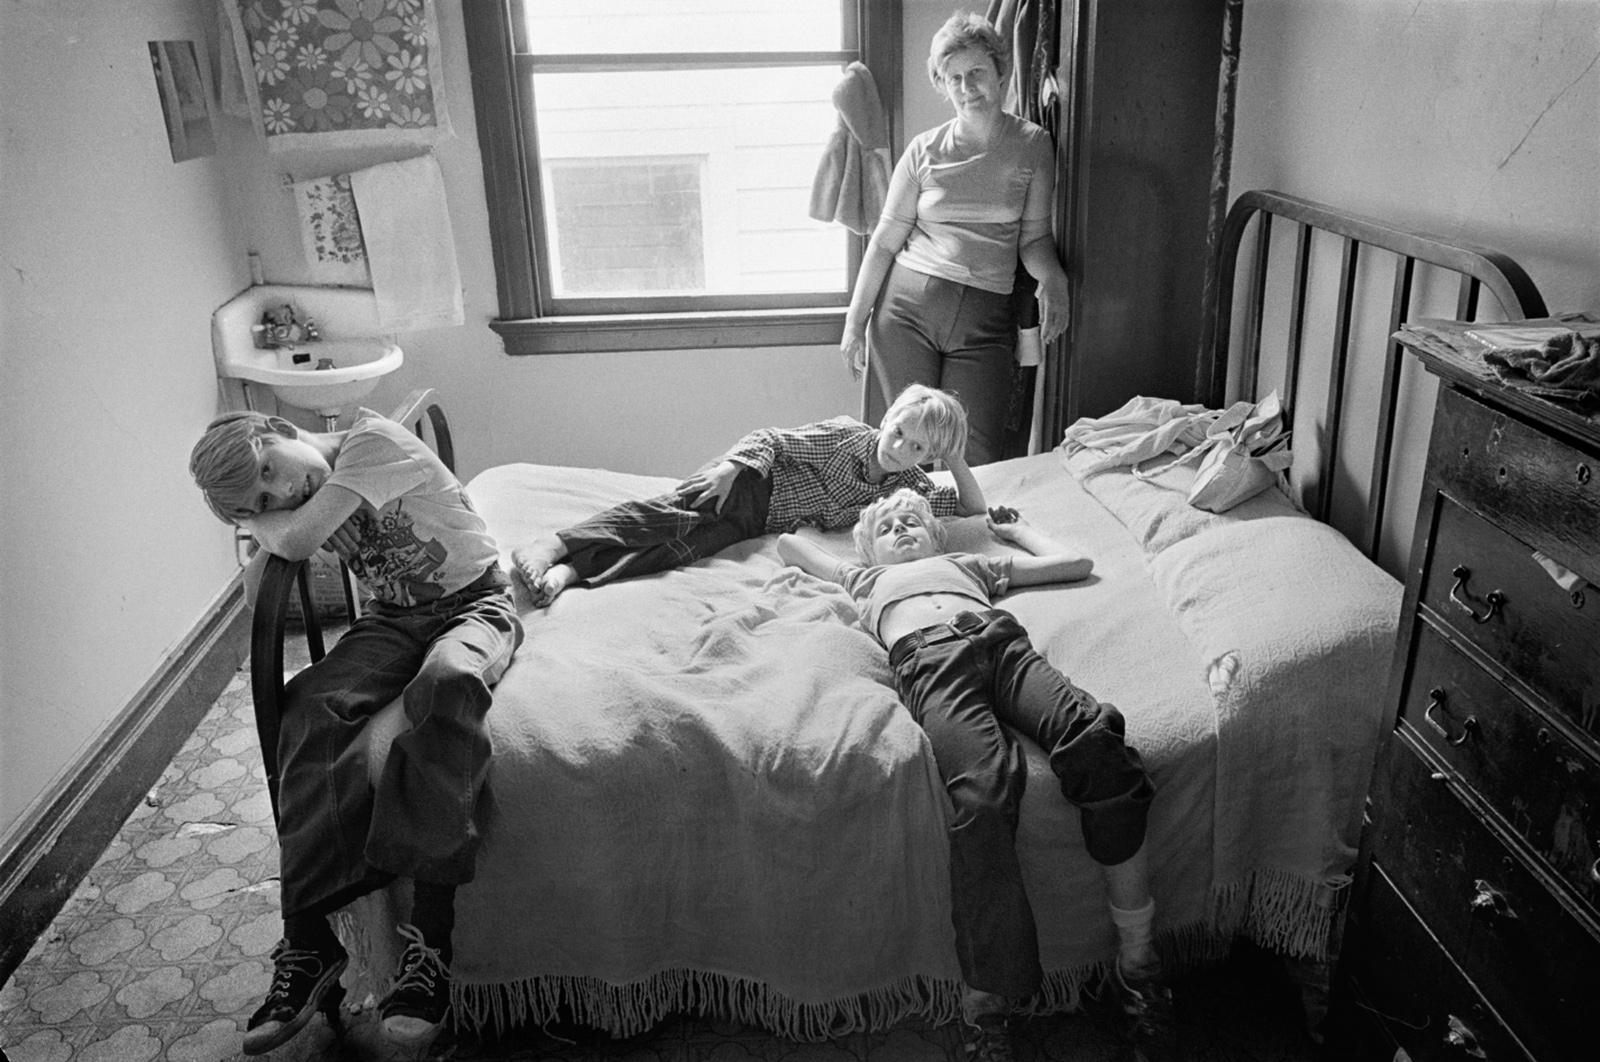 ‘The Lynch Family, Room 17, the Wagner Hotel,’ a residential hotel in the Mission District of San Francisco, 1979; photograph by Jim Goldberg from the expanded edition of his 1985 book Rich and Poor, published in 2013 by Steidl